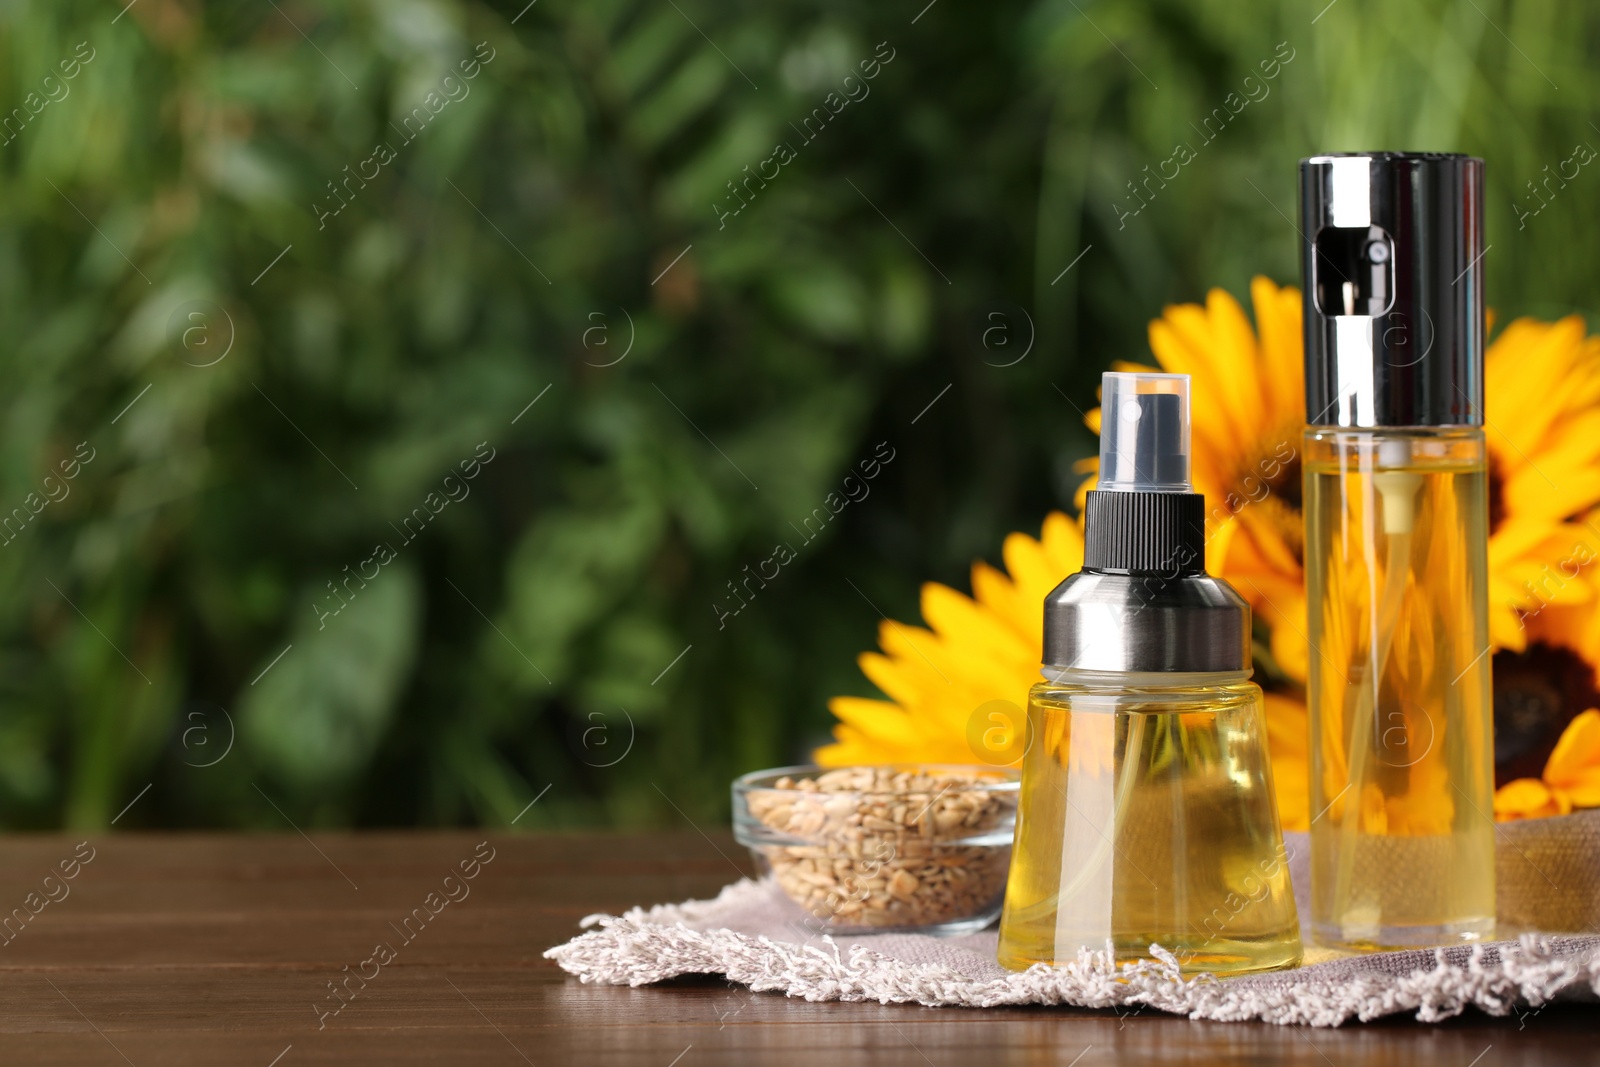 Photo of Spray bottles with cooking oil near sunflower seeds and flowers on wooden table against blurred green background. Space for text